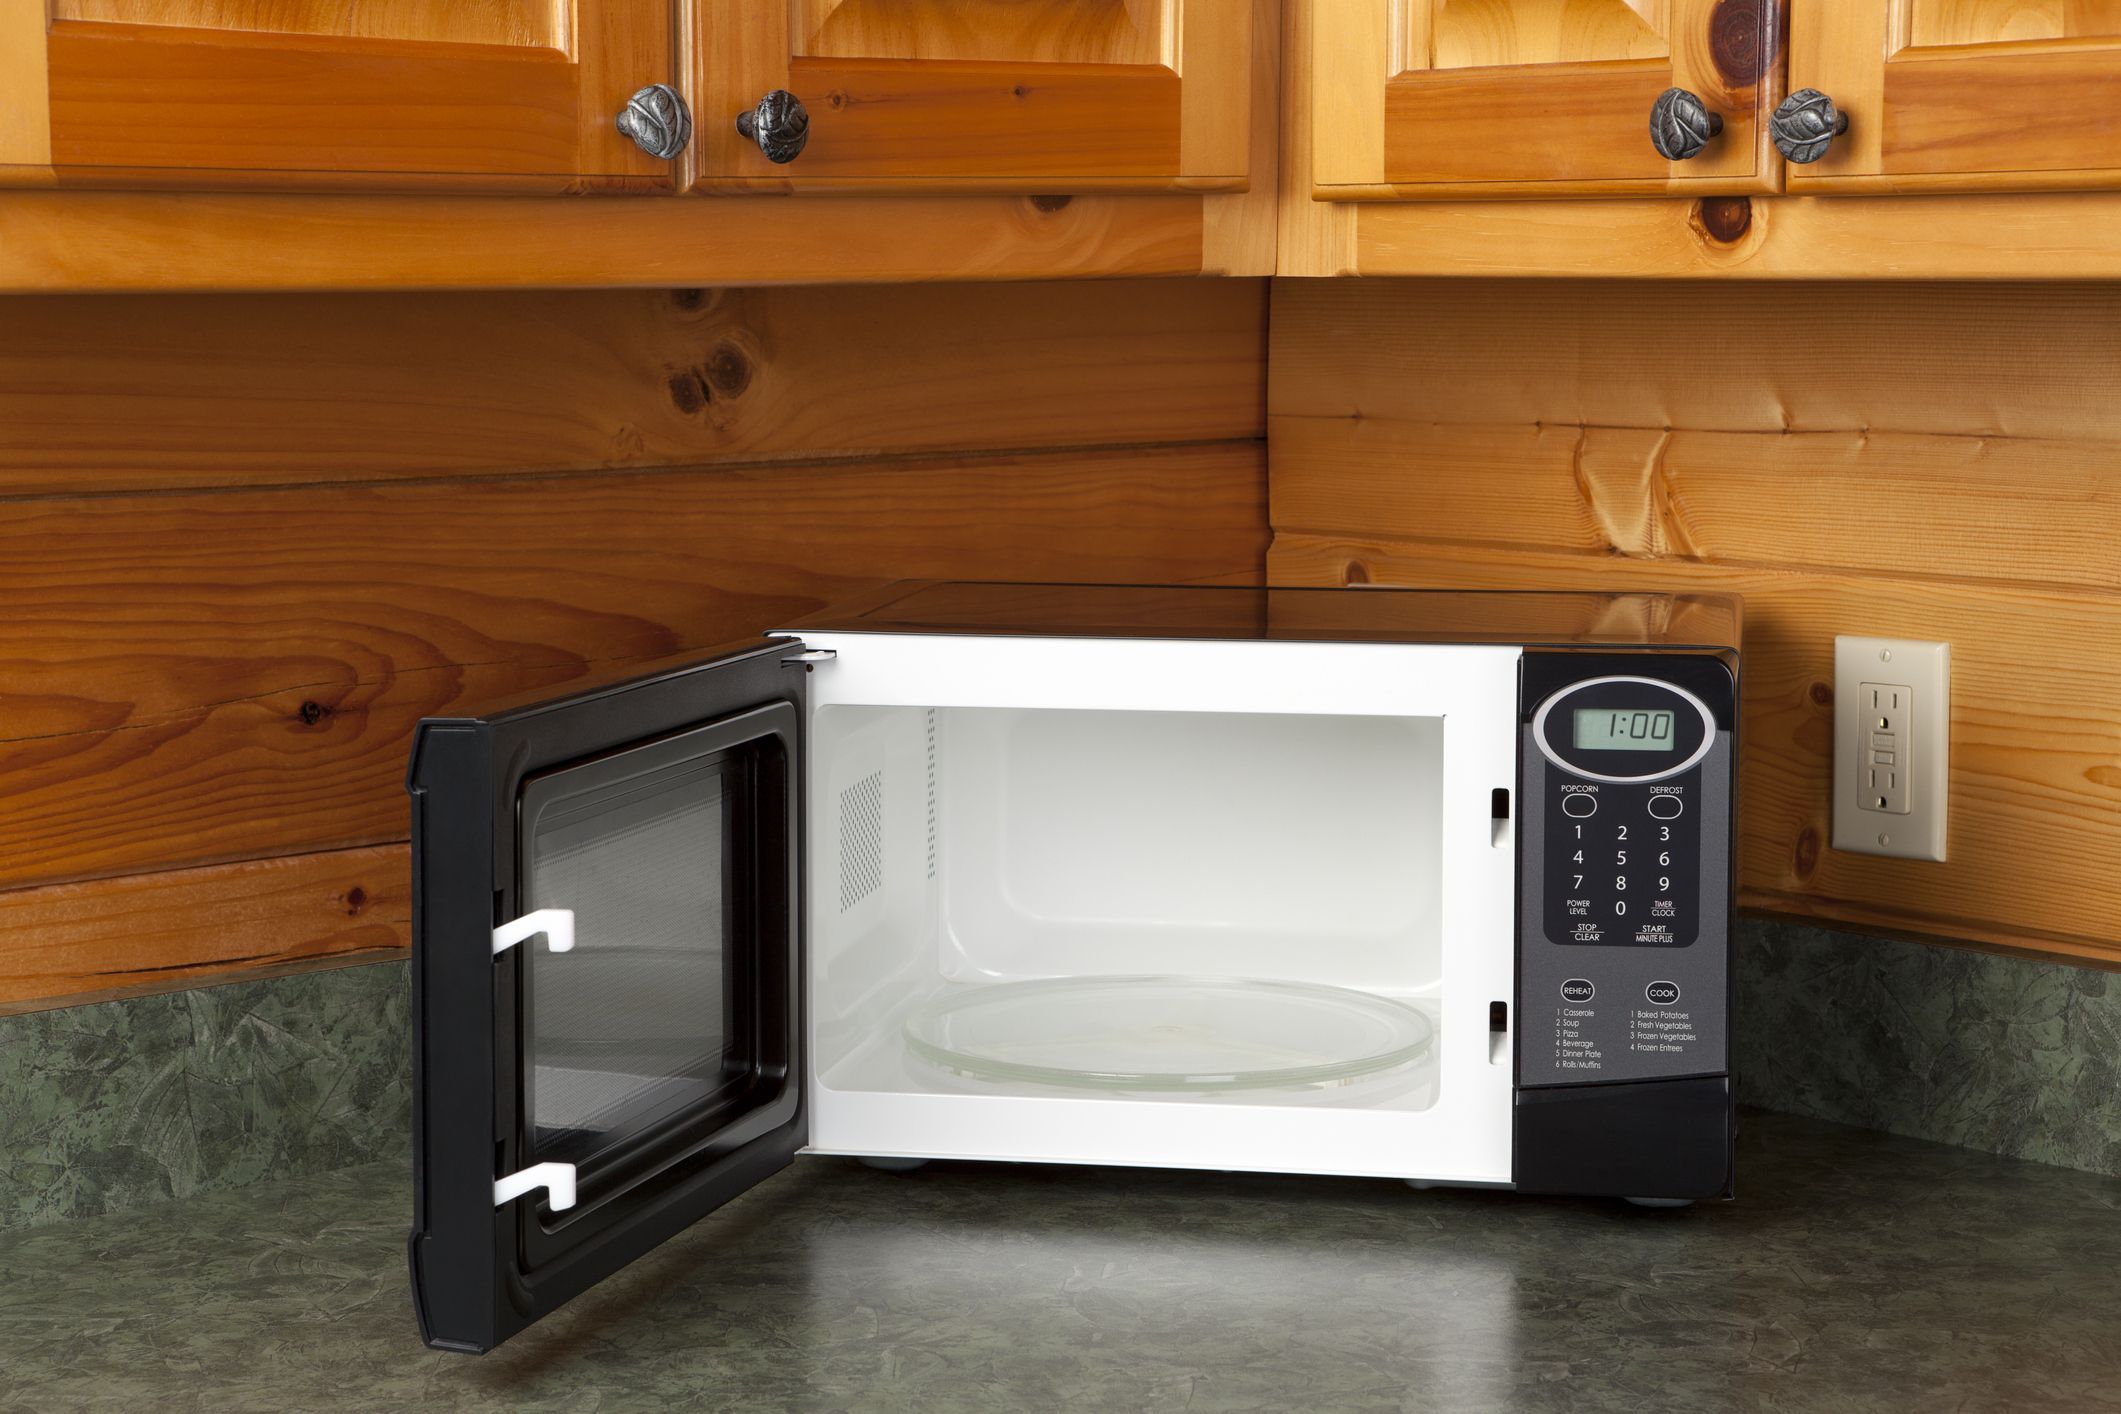 https://hips.hearstapps.com/hmg-prod/images/how-to-clean-microwave-1670961772.jpeg